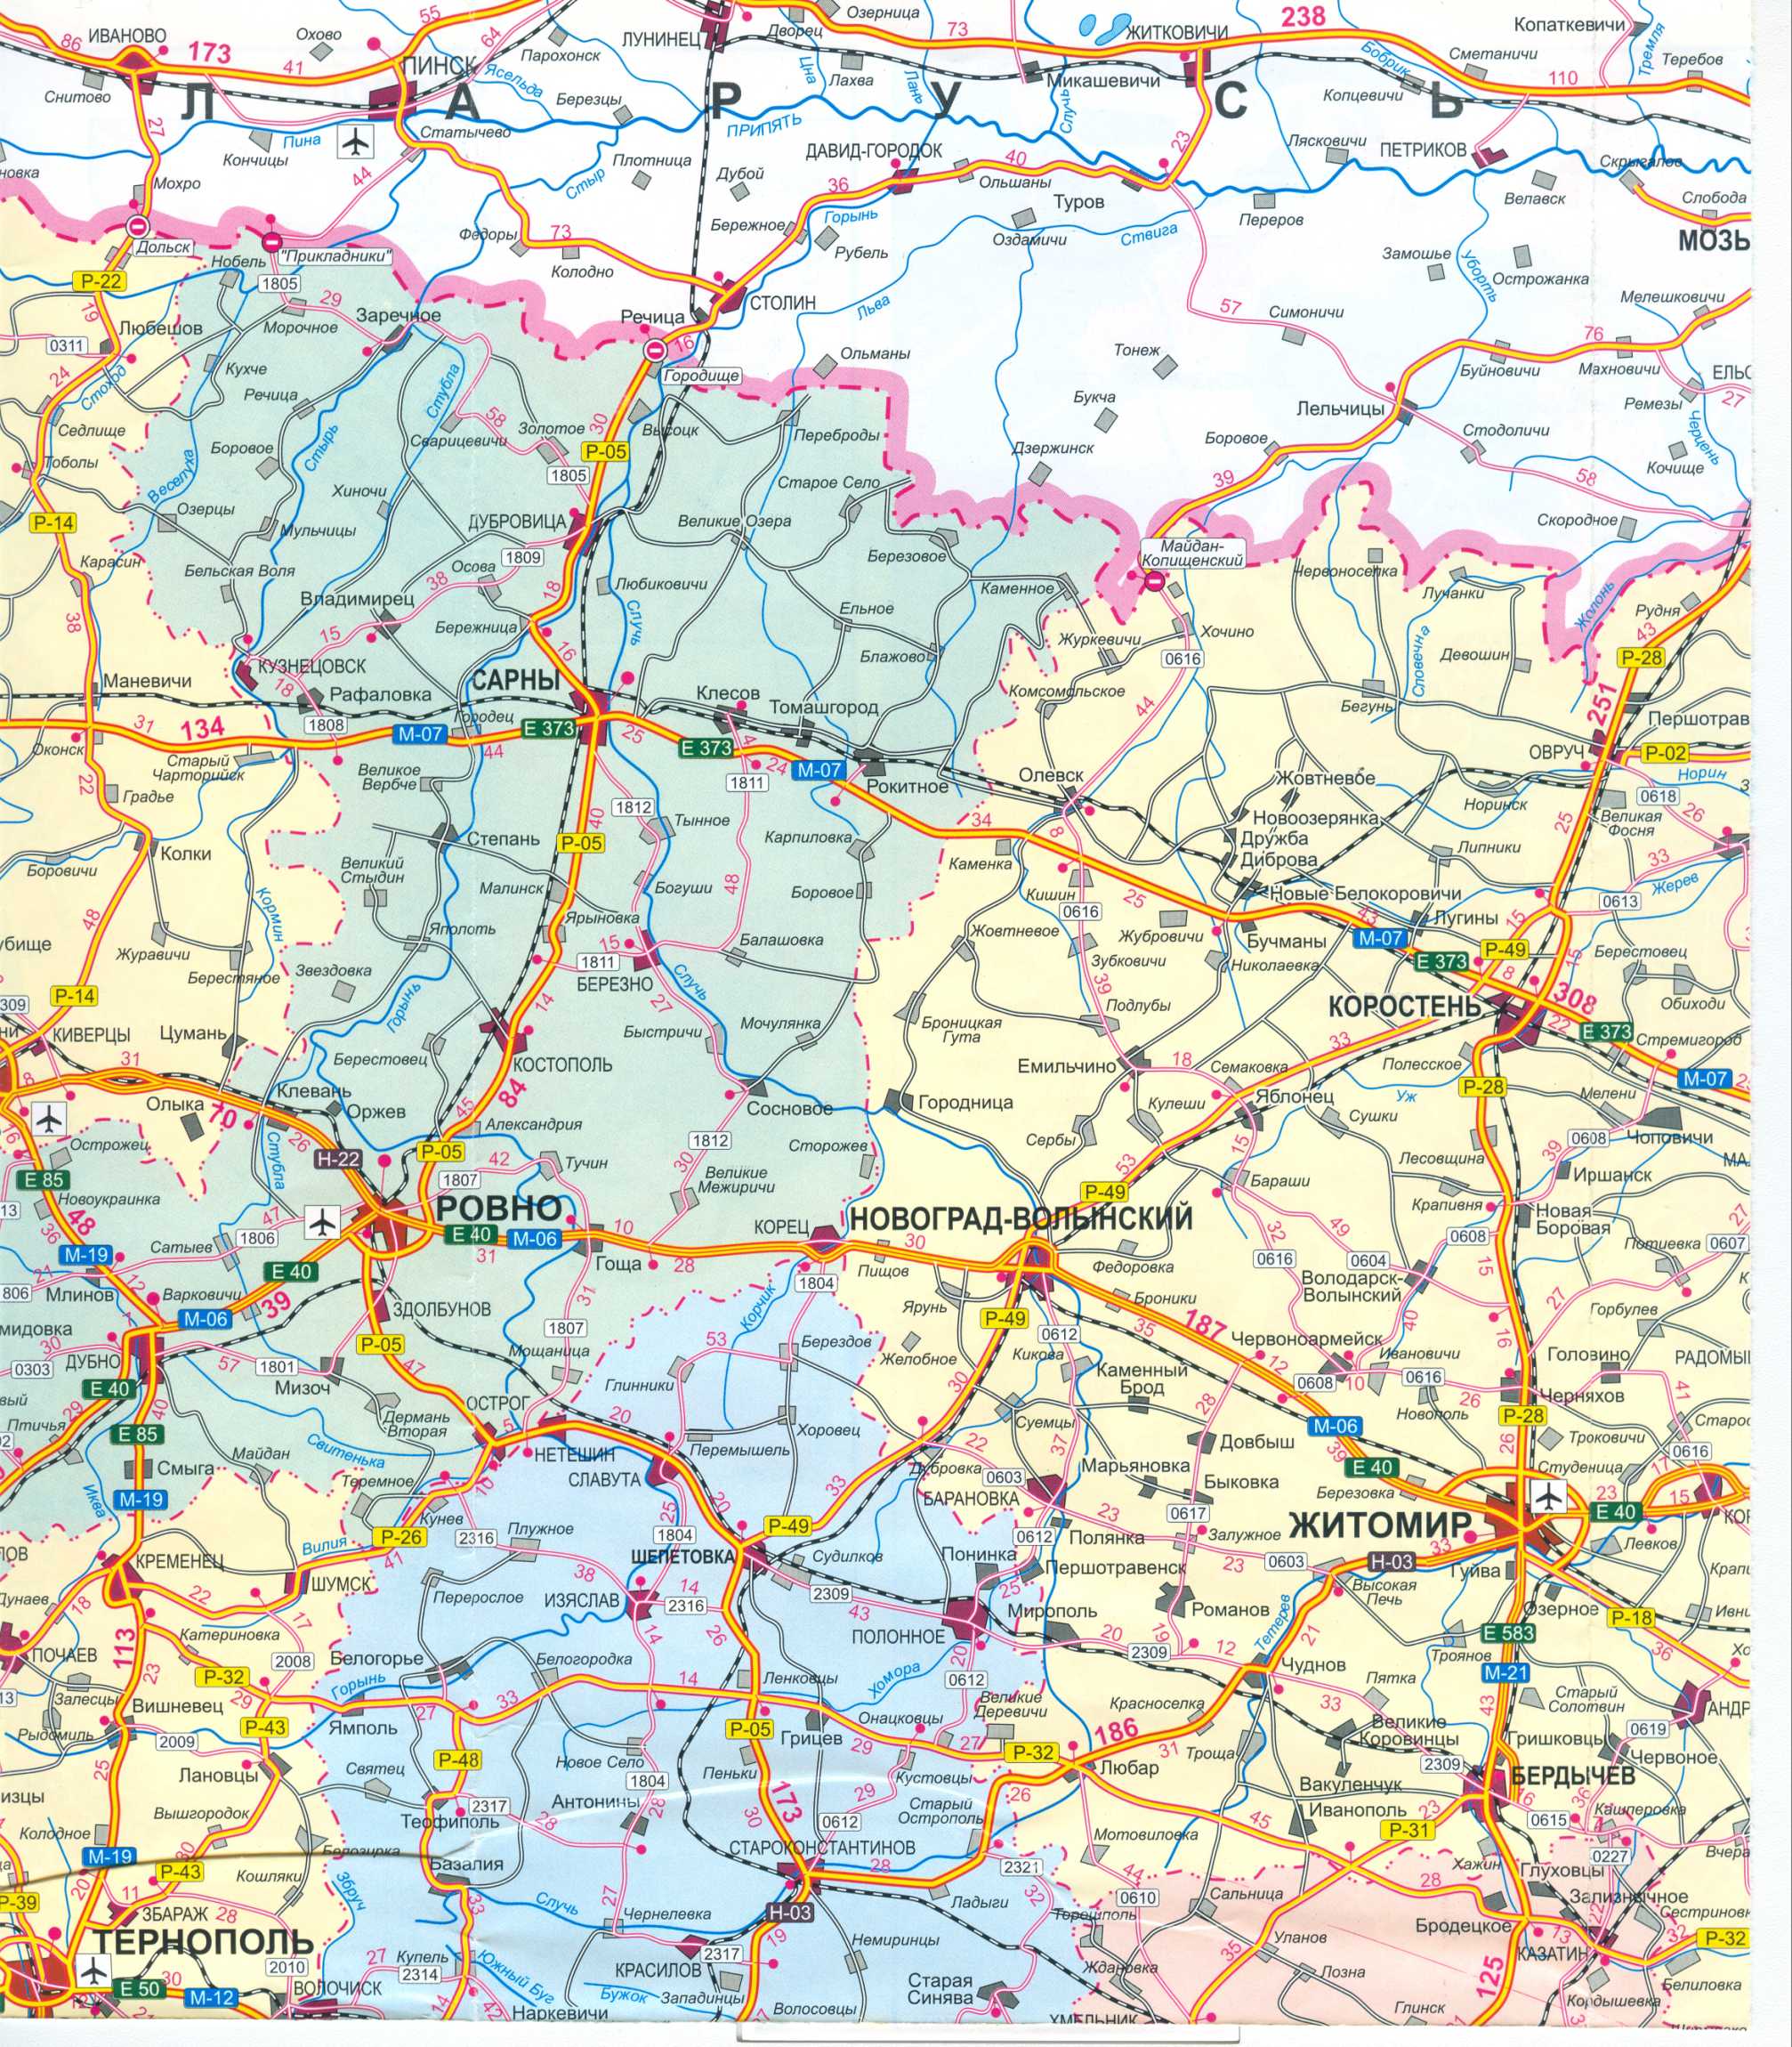 The map of Ukraine is free of charge. Map of roads of Ukraine free download. Big map of Ukraine's roads for free, B0